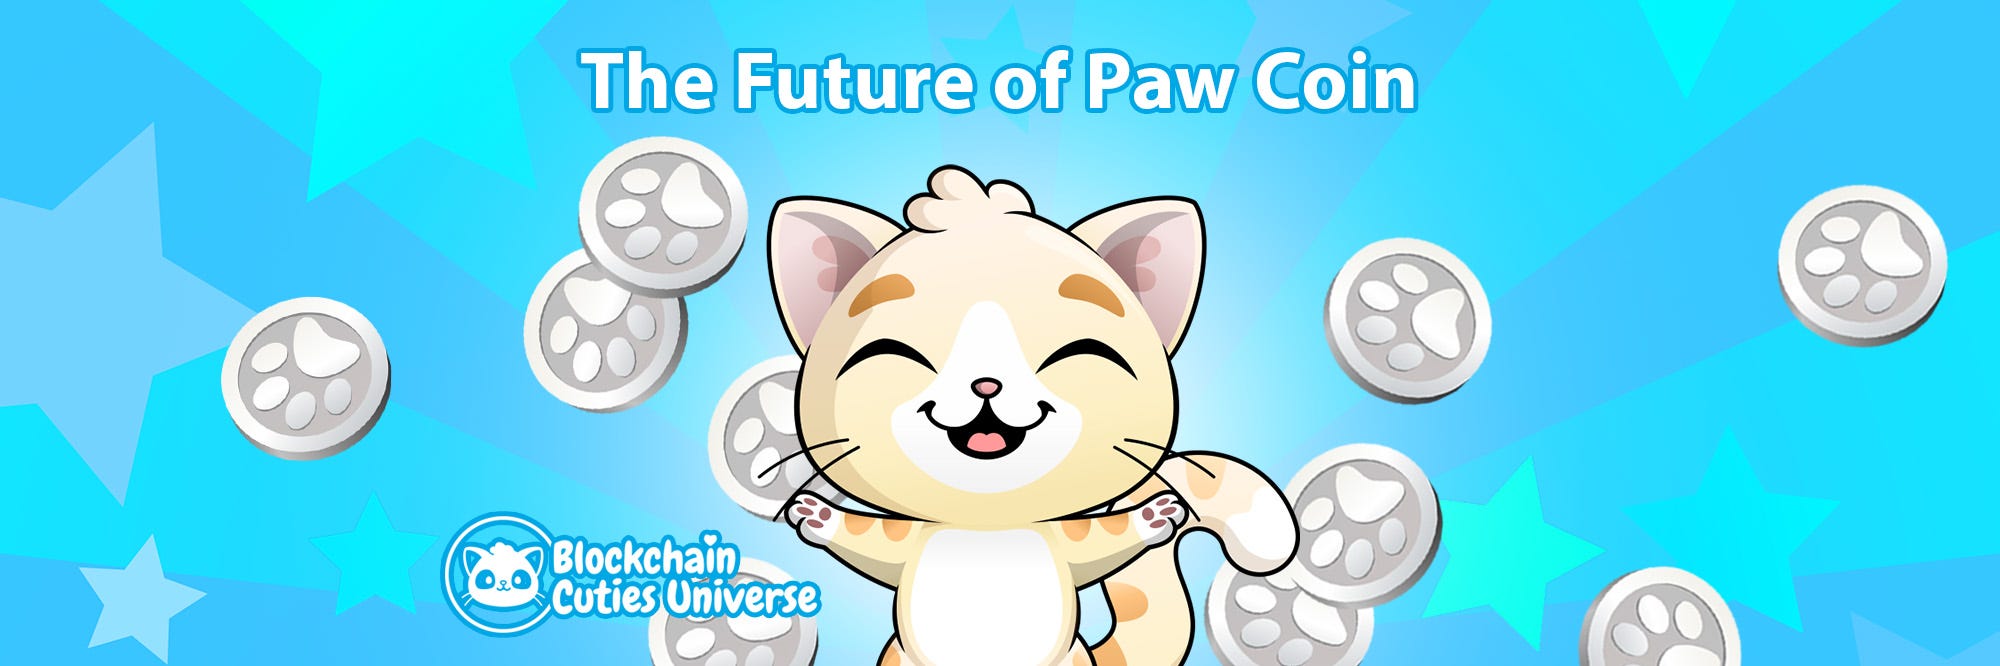 krølle Stedord accent Coming Soon: Big Changes in Earning Paw Coins | by Blockchain Cuties |  Blockchain Cuties Universe | Medium